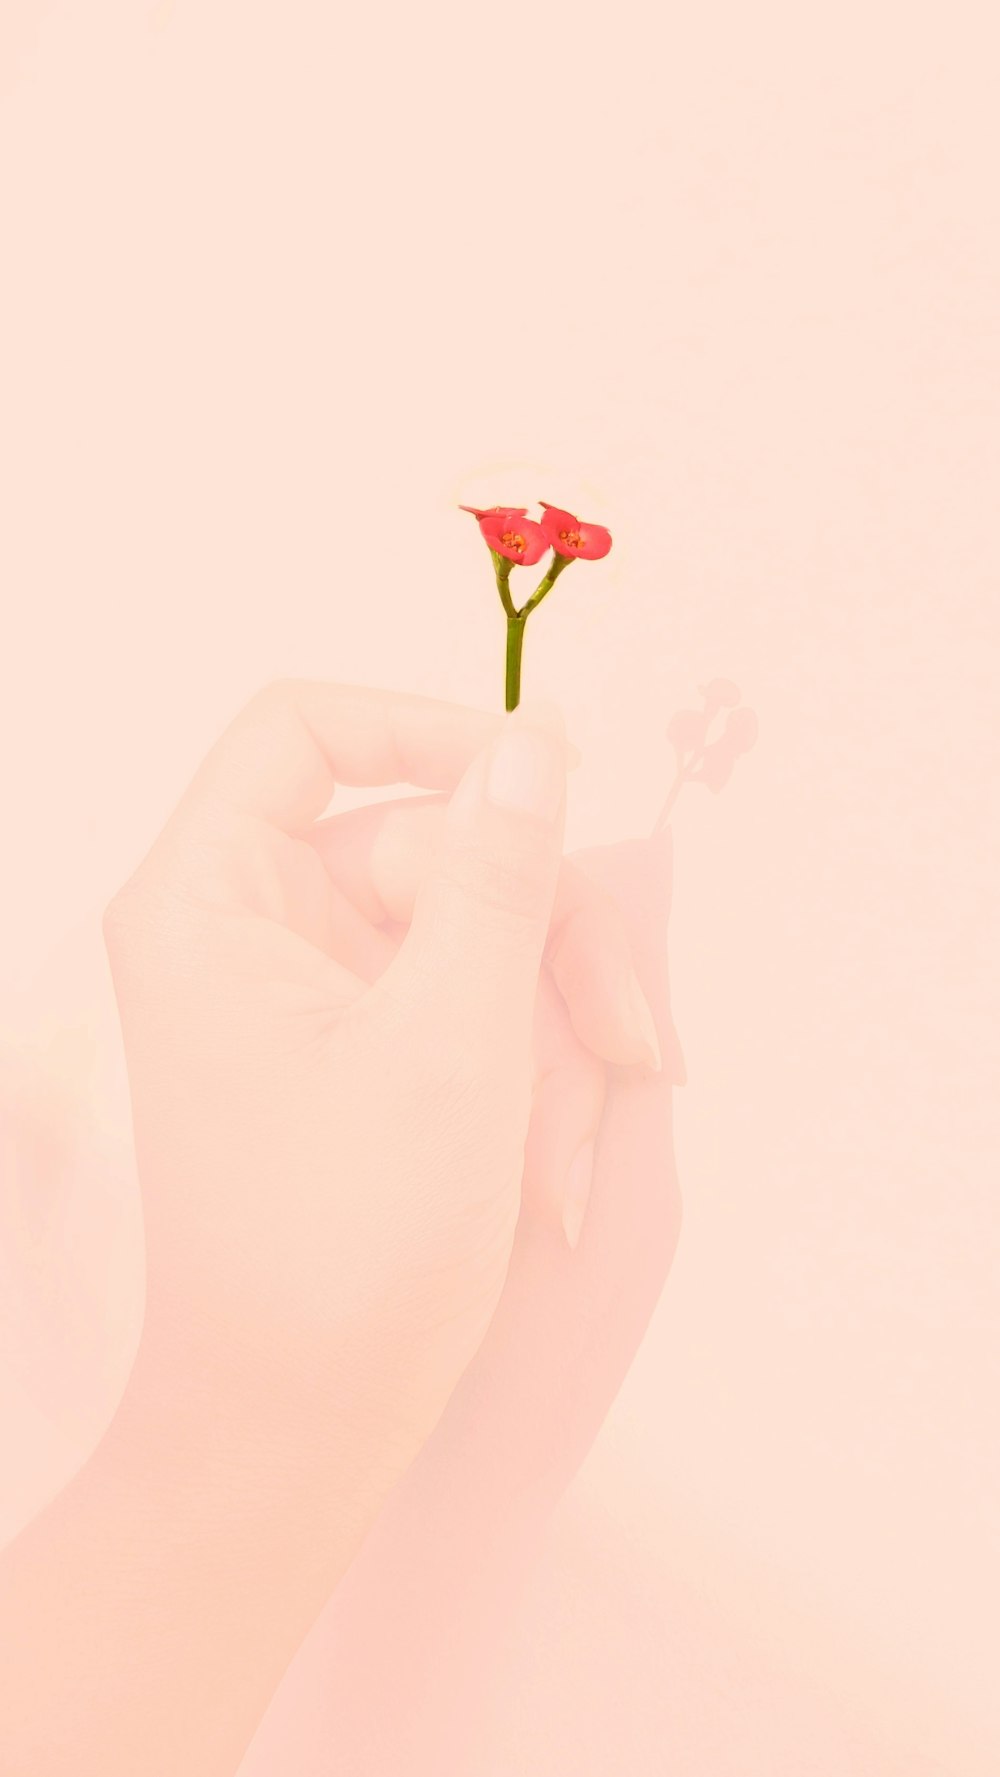 person holding red rose flower